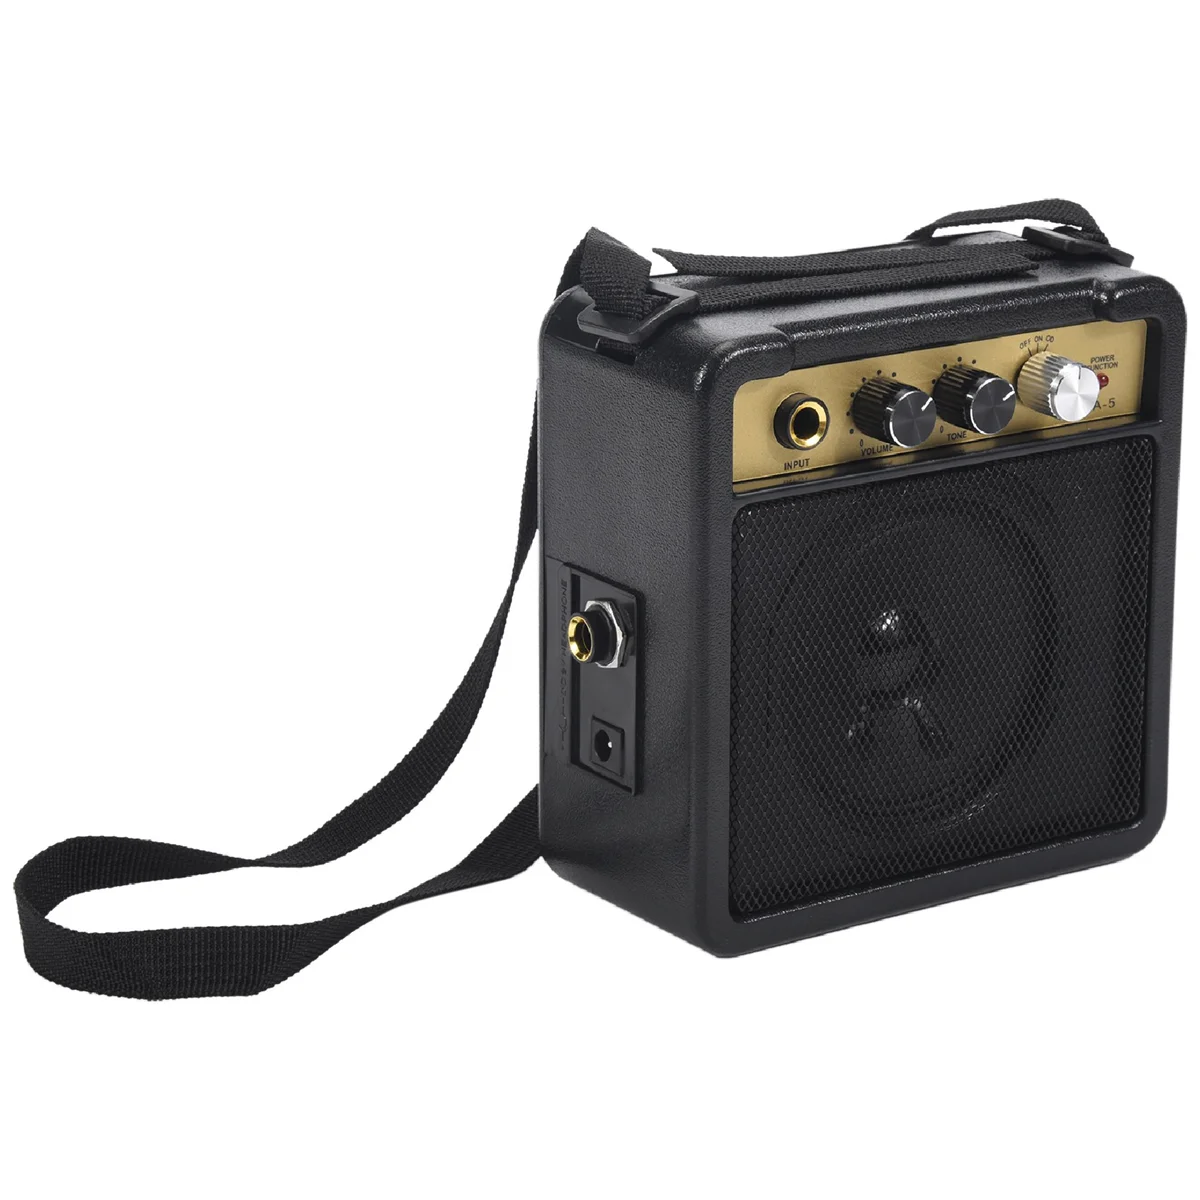 

Mini Guitar Amplifier Amp Speaker 5W with 6.35mm Input 1/4 Inch Headphone Output Supports Volume Tone Adjustment